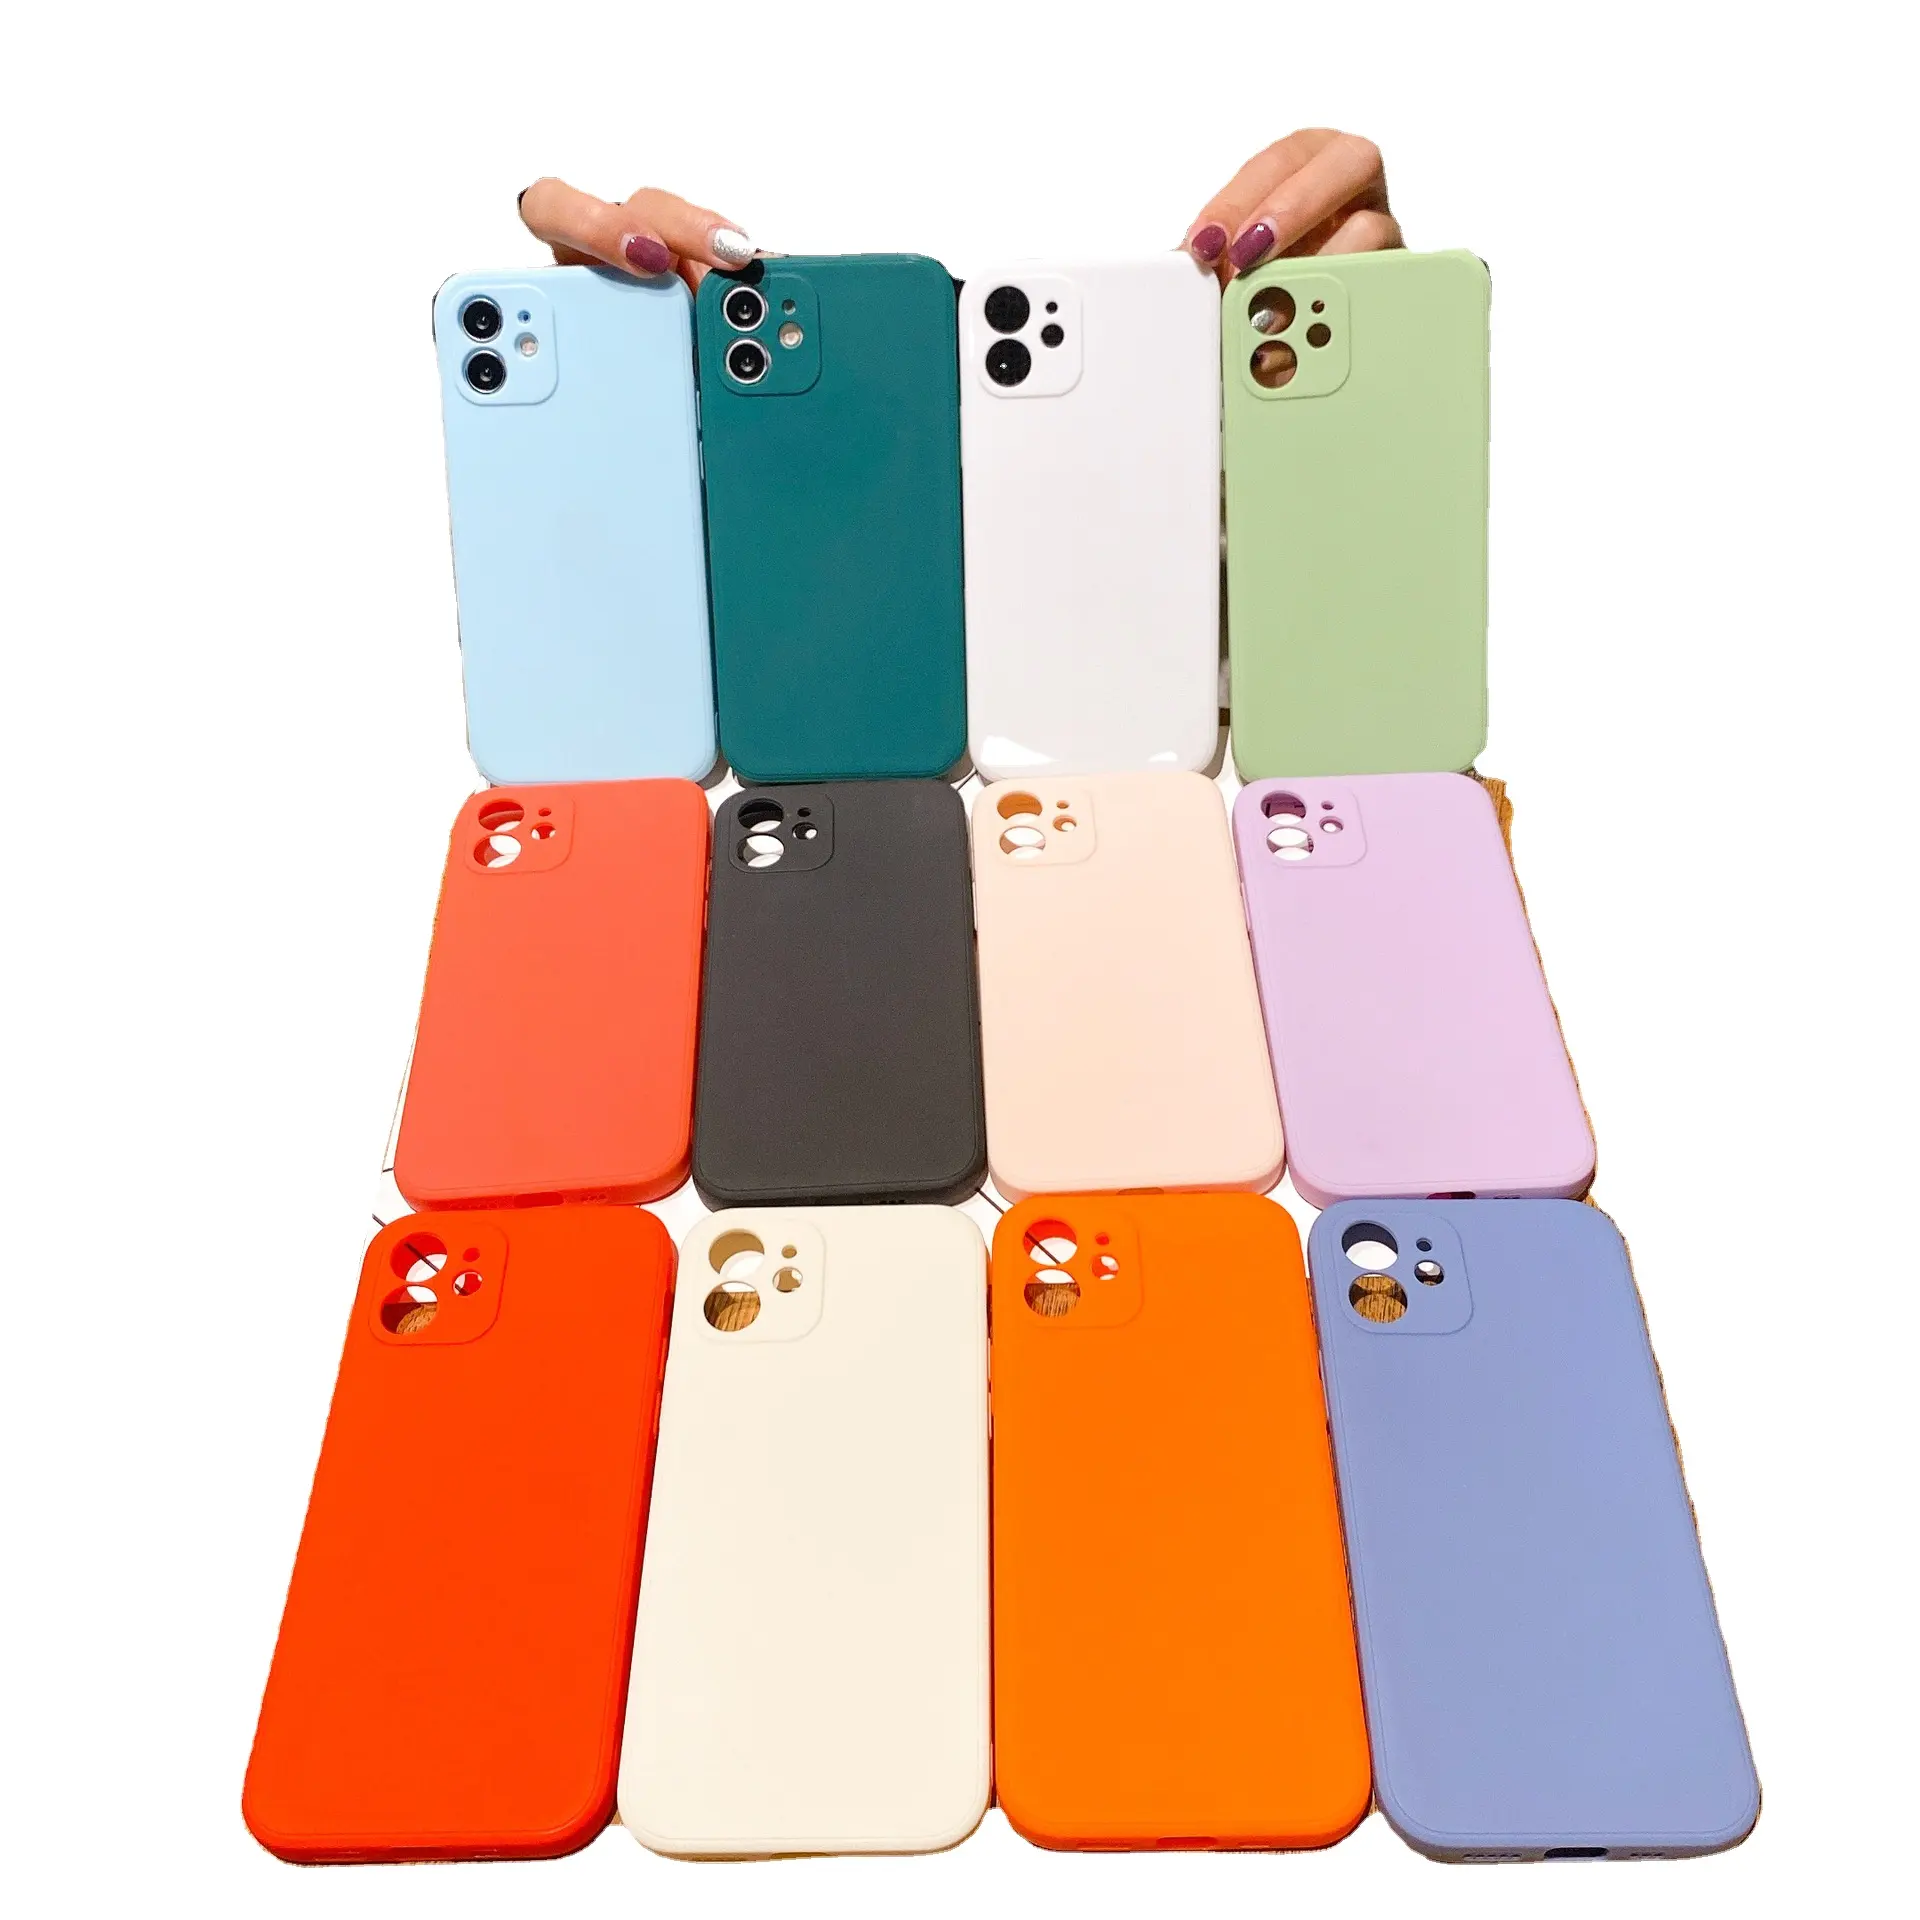 New product Rubik's Cube mobile phone case straight edge fine hole frosted tpu protective cover wholesale